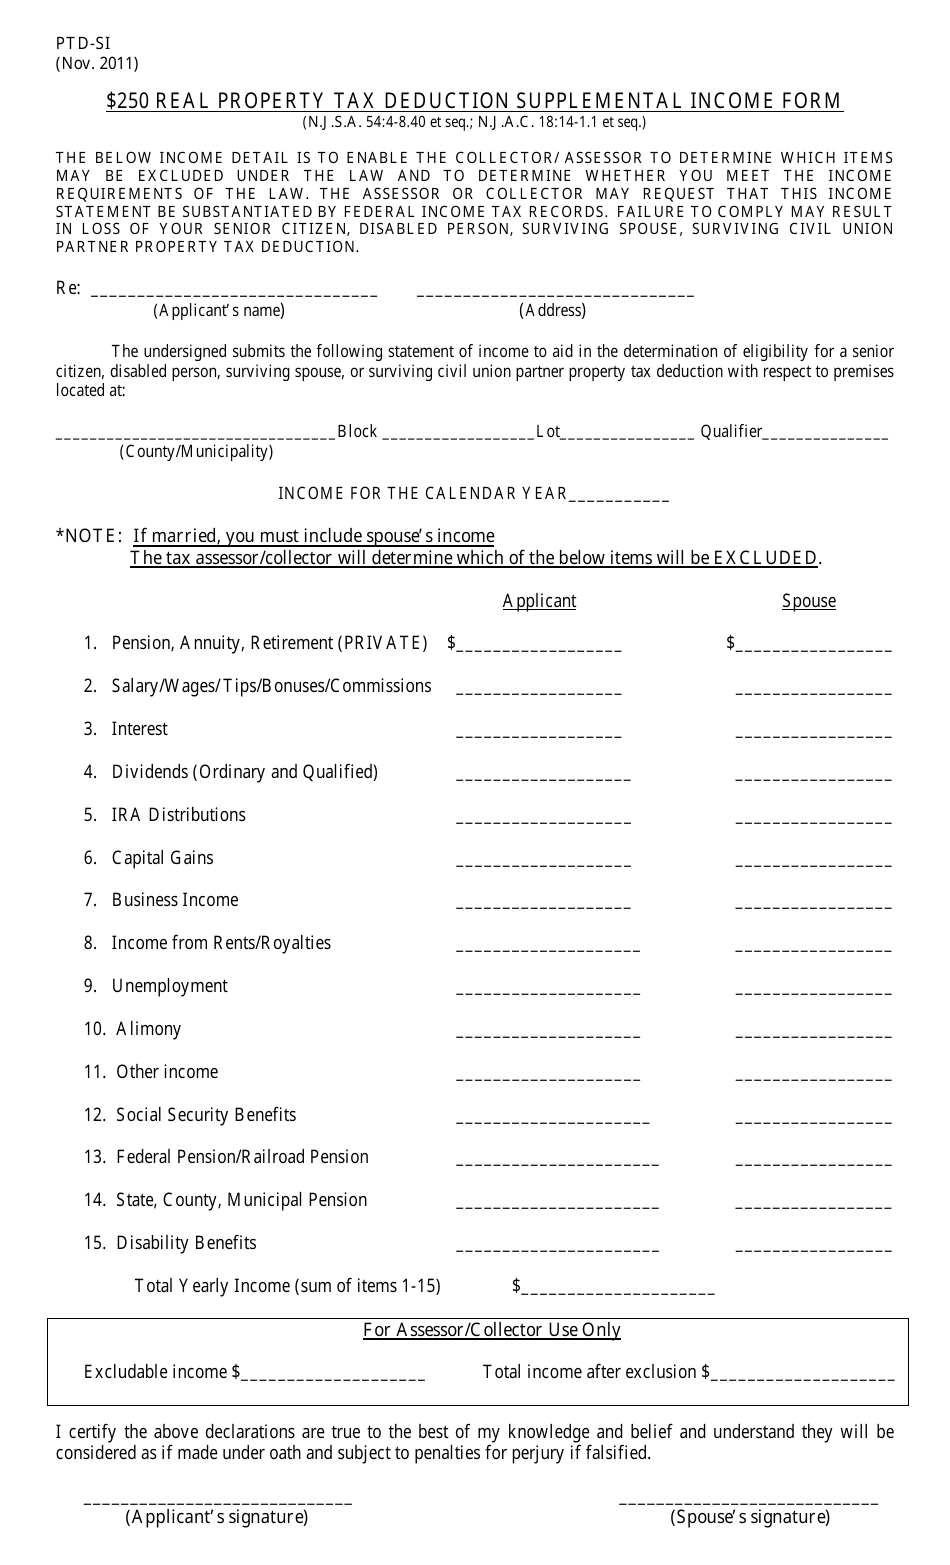 Form PTD-SI 250 Real Property Tax Deduction Supplemental Income Form - New Jersey, Page 1